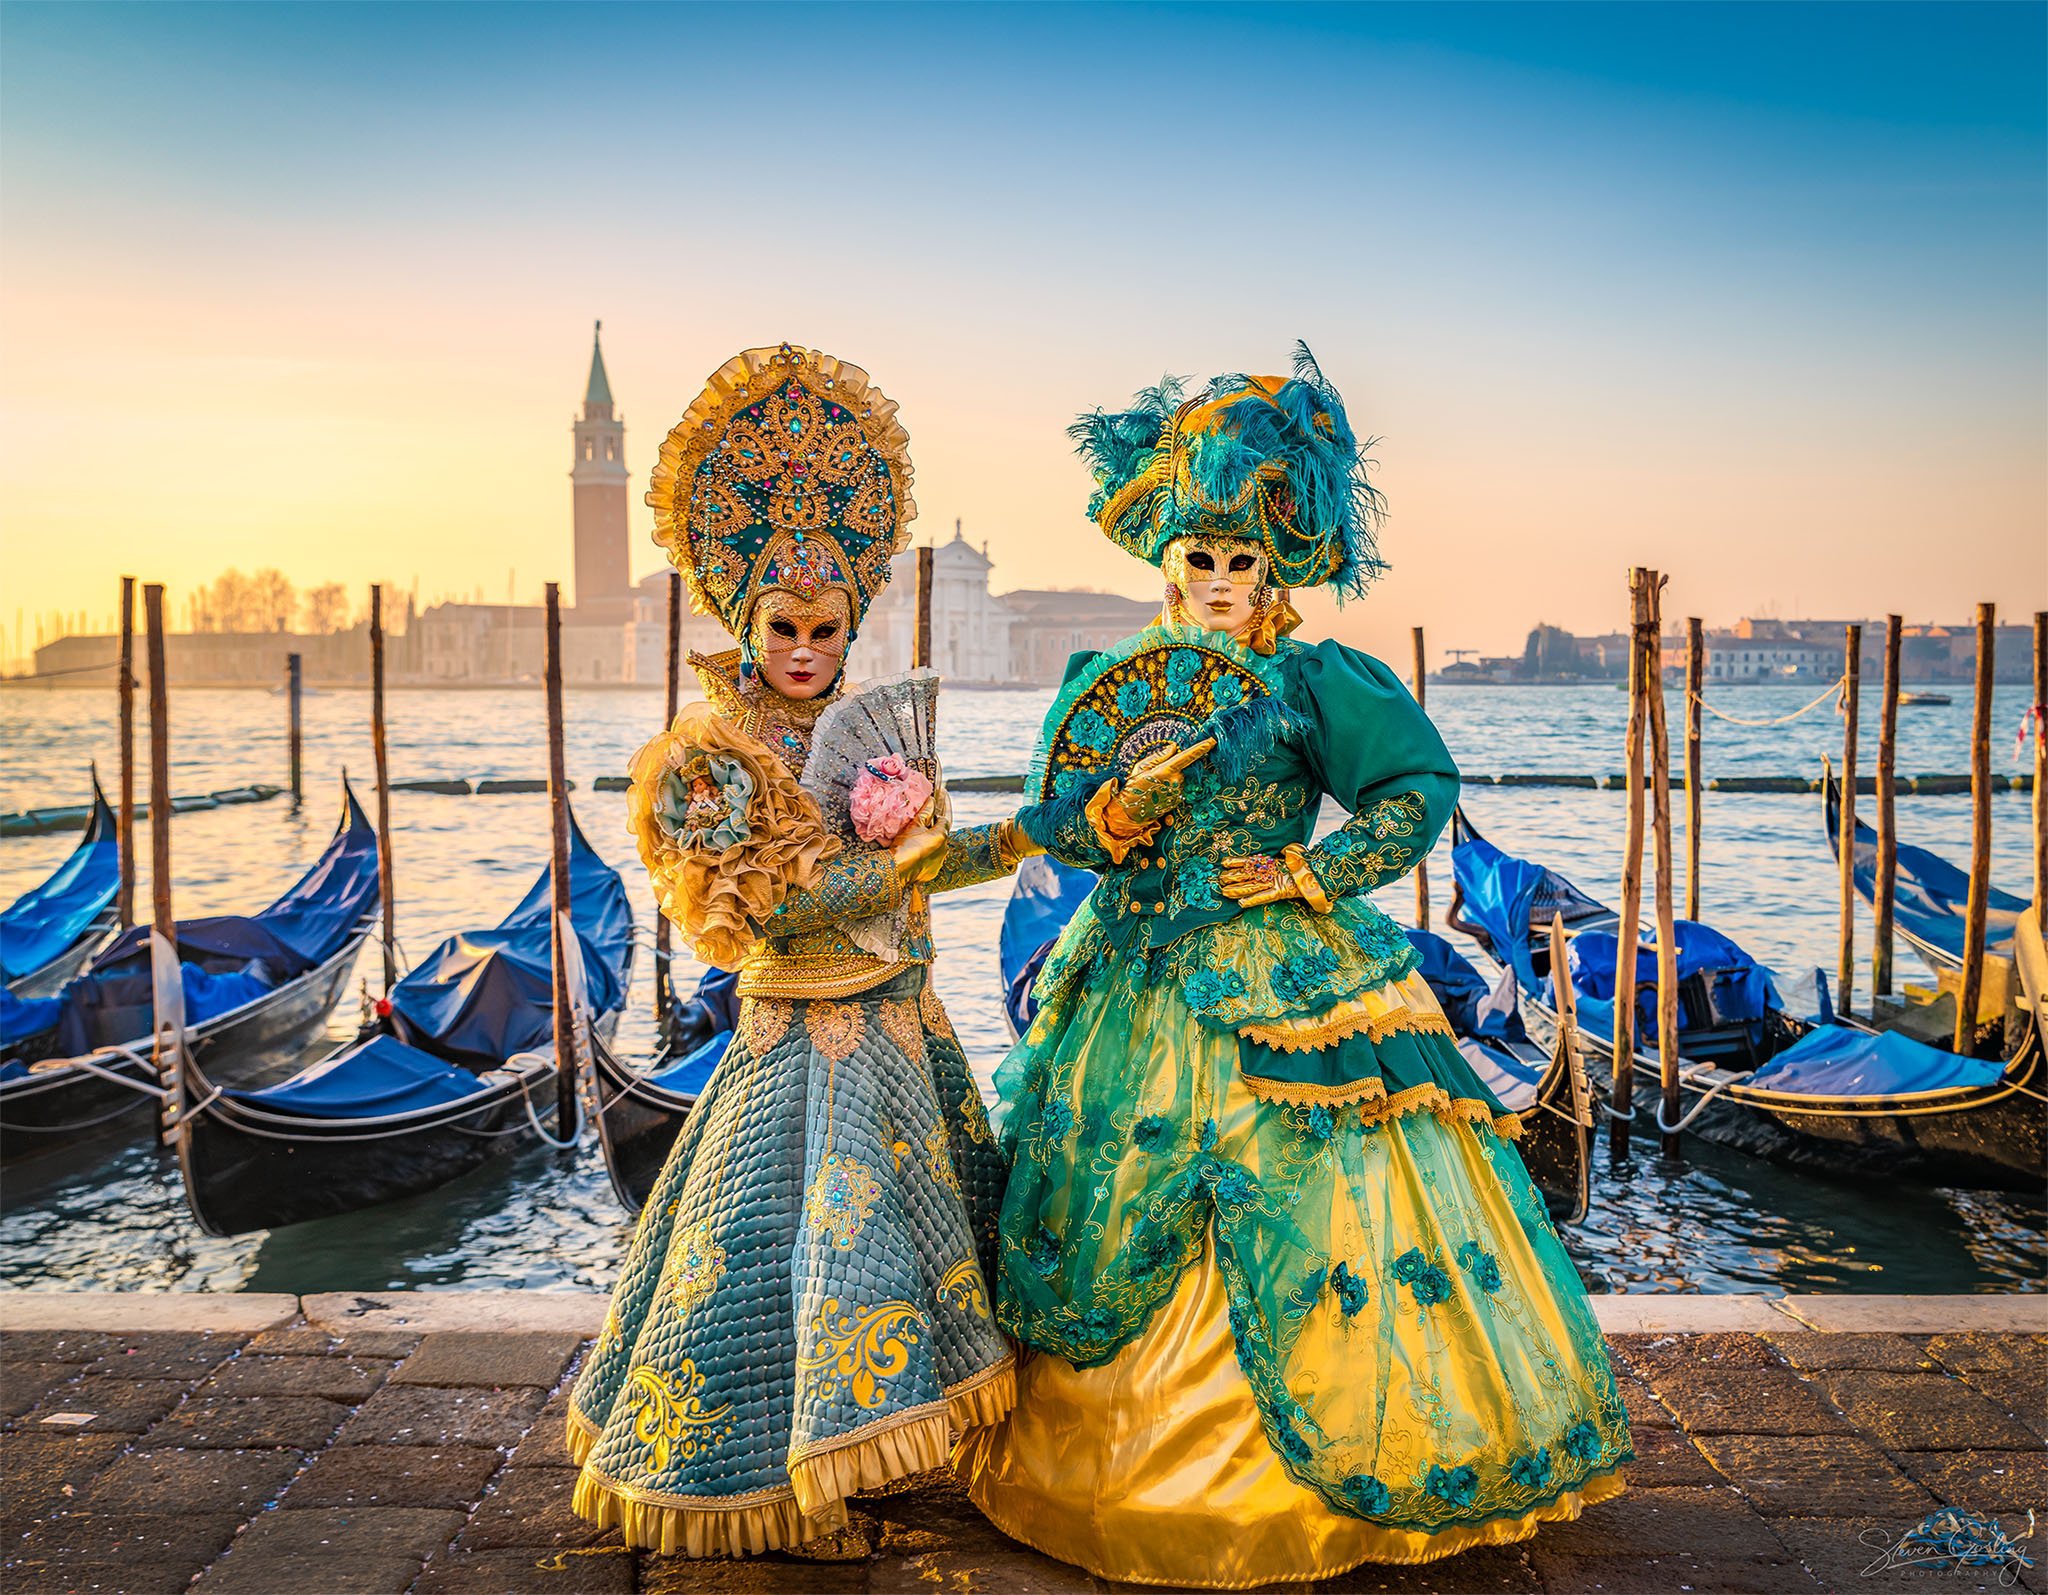 Ballet & Ball Gowns Photography Workshop at the Venice Carnival 125